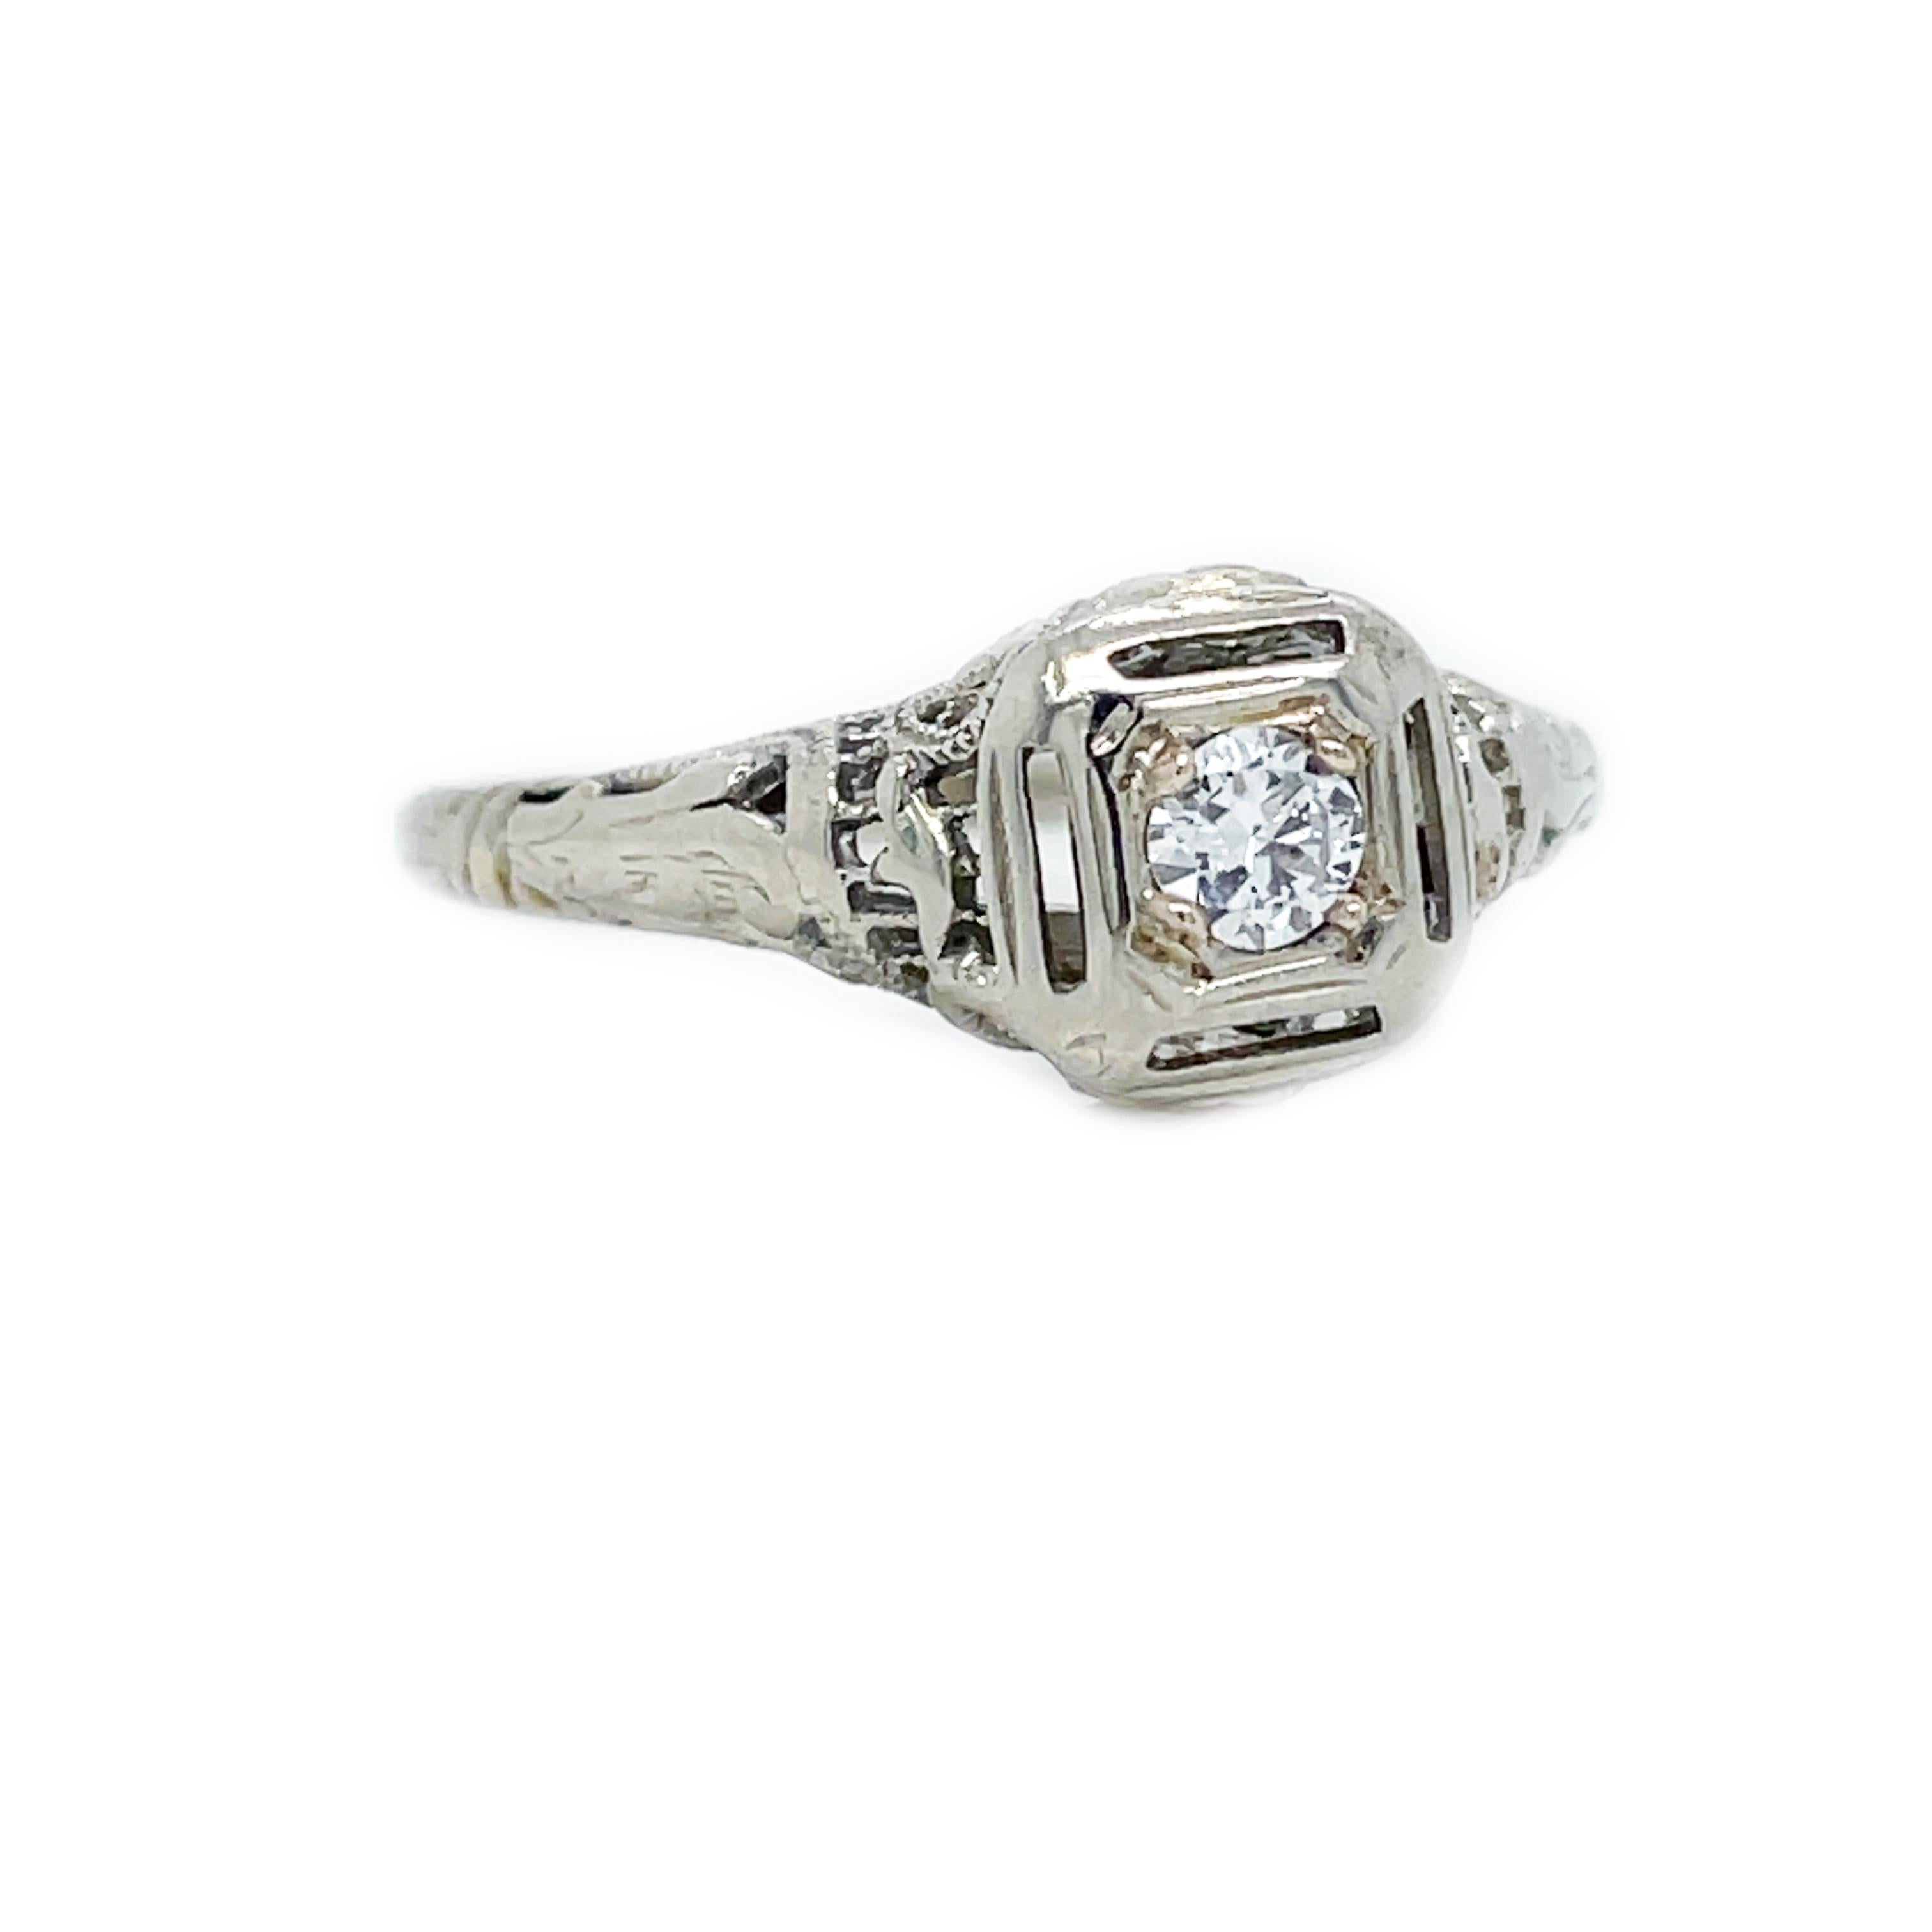 This is a gorgeous 18K white gold filigree ring from the 1920s showcasing a gorgeous white diamond at its center! A bright-white and sparkling round diamond, weighing .15 carat, scintillates within a double square setting, detailed with fine